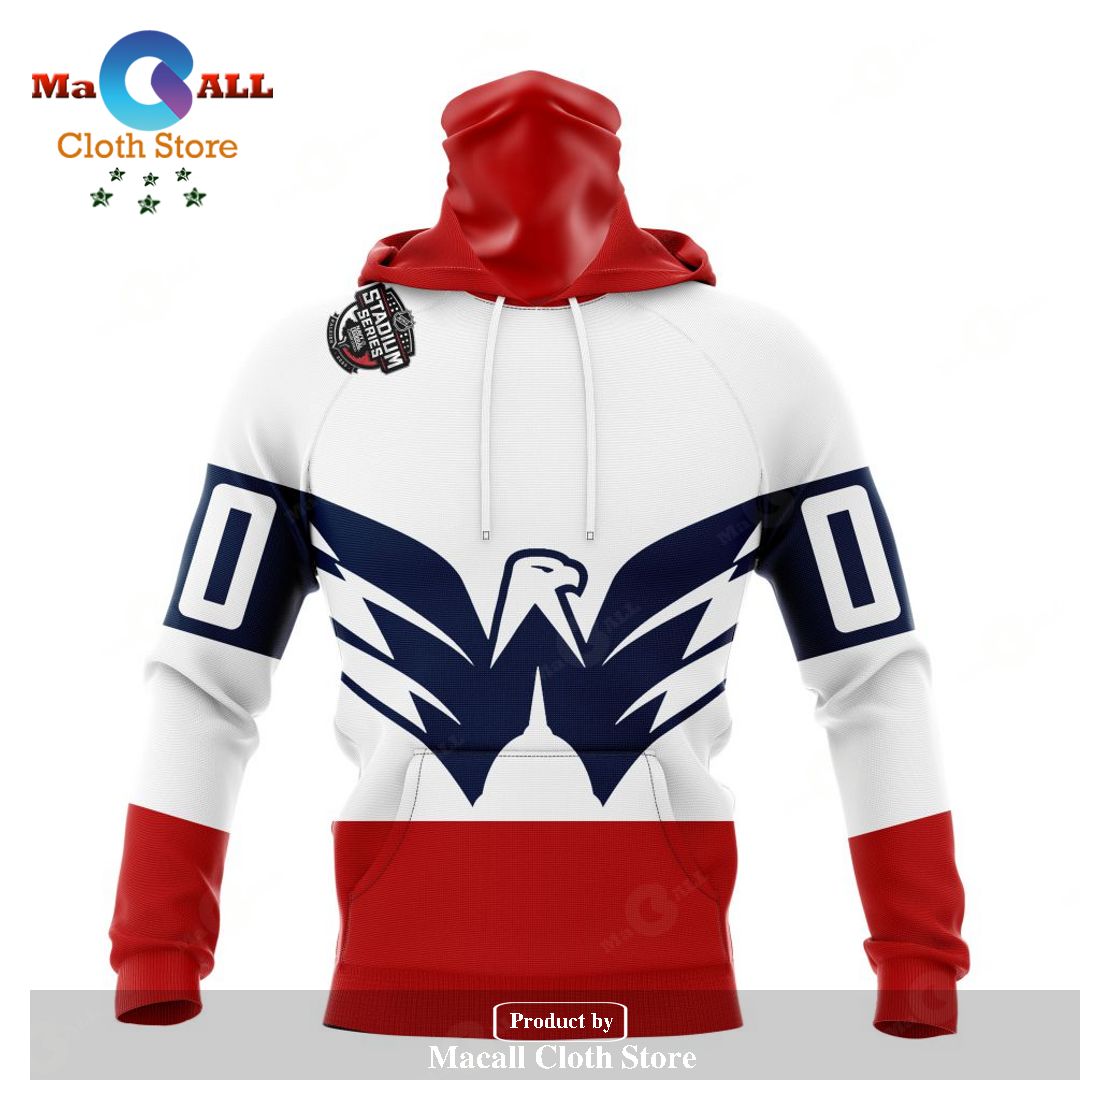 Personalized NHL Washington Capitals Jersey 2023 Style 3D Hoodie - Ecomhao  Store in 2023